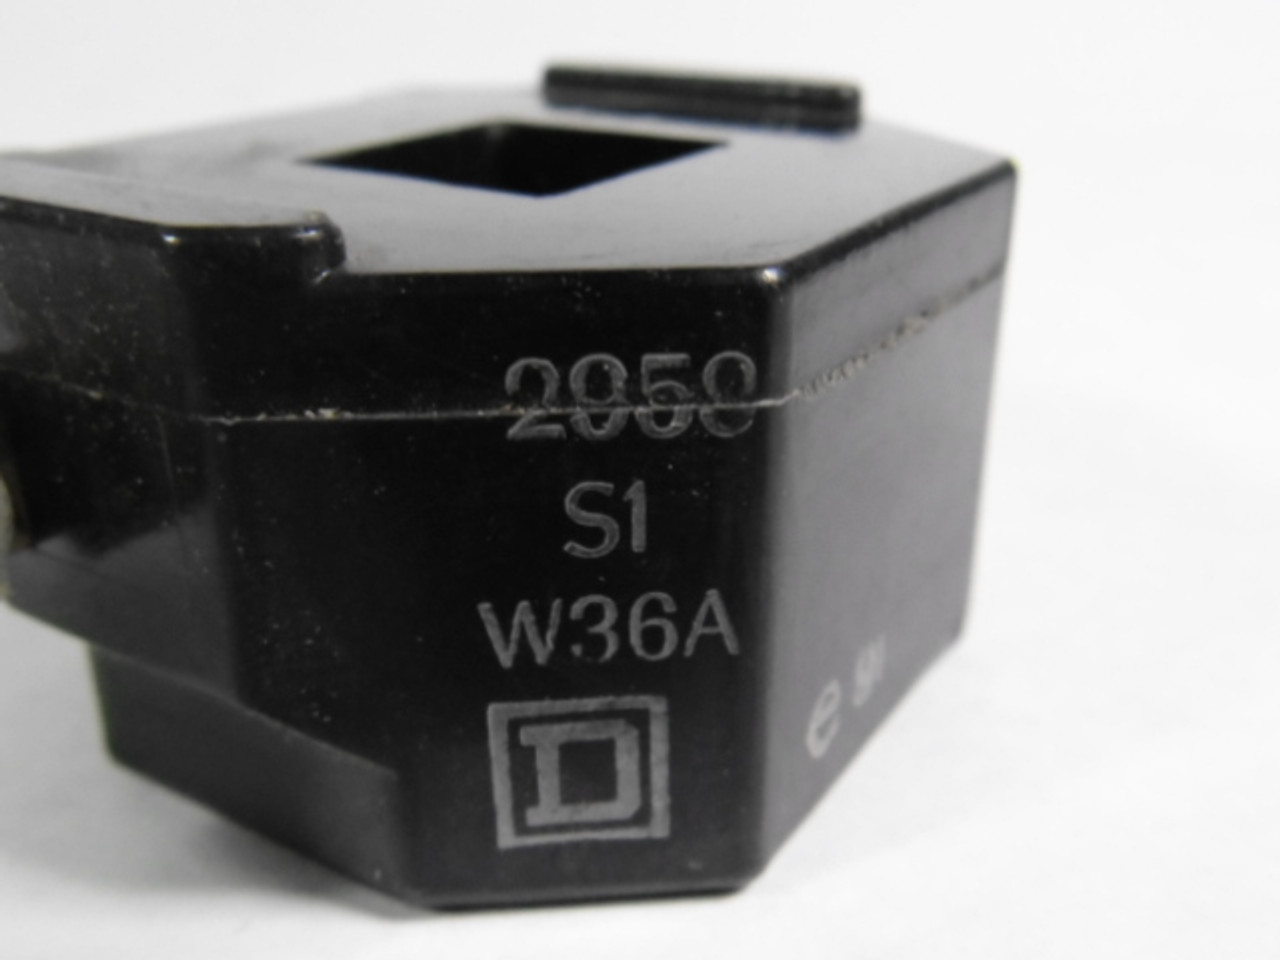 Square D 2959-S1-W36A Magnetic Coil 220/240V 50/60Hz ! NEW !